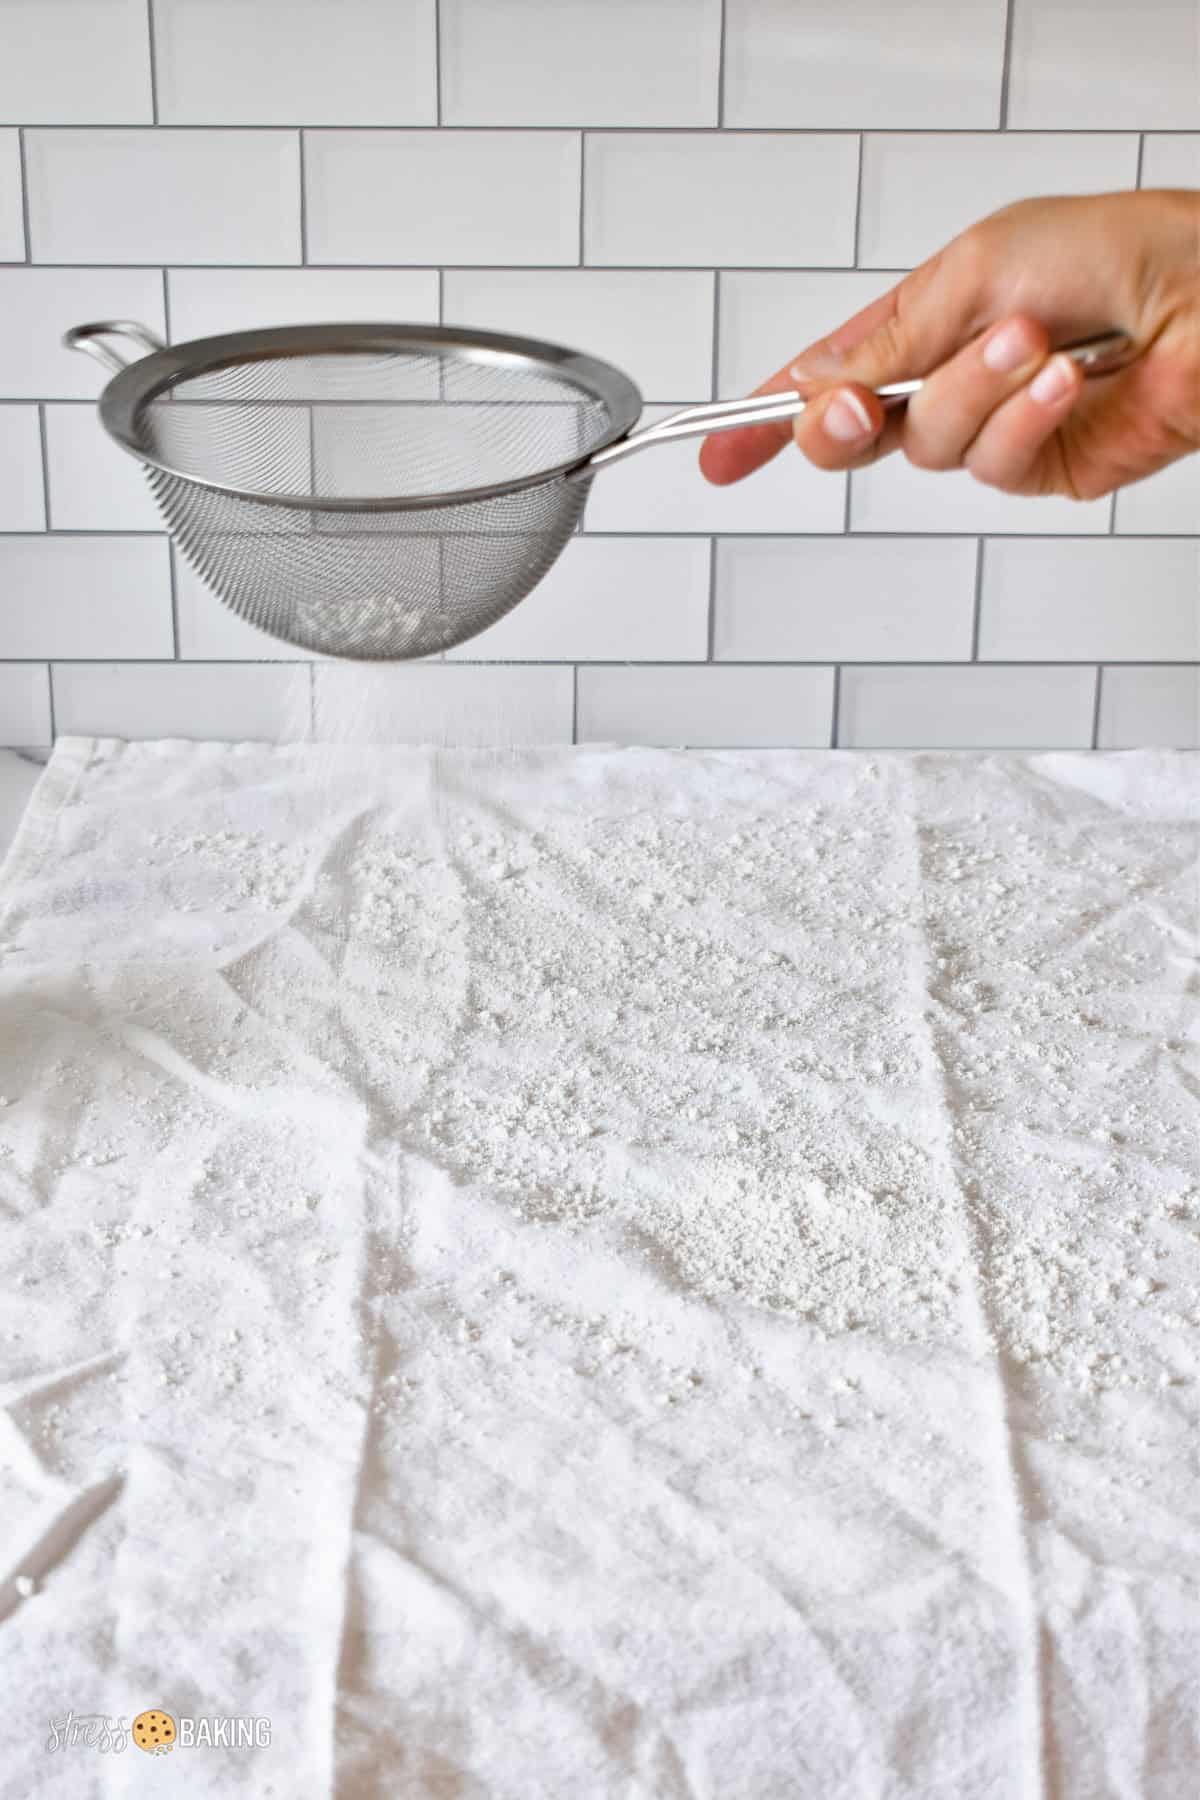 Using a fine mesh sieve to dust a white kitchen towel with powdered sugar